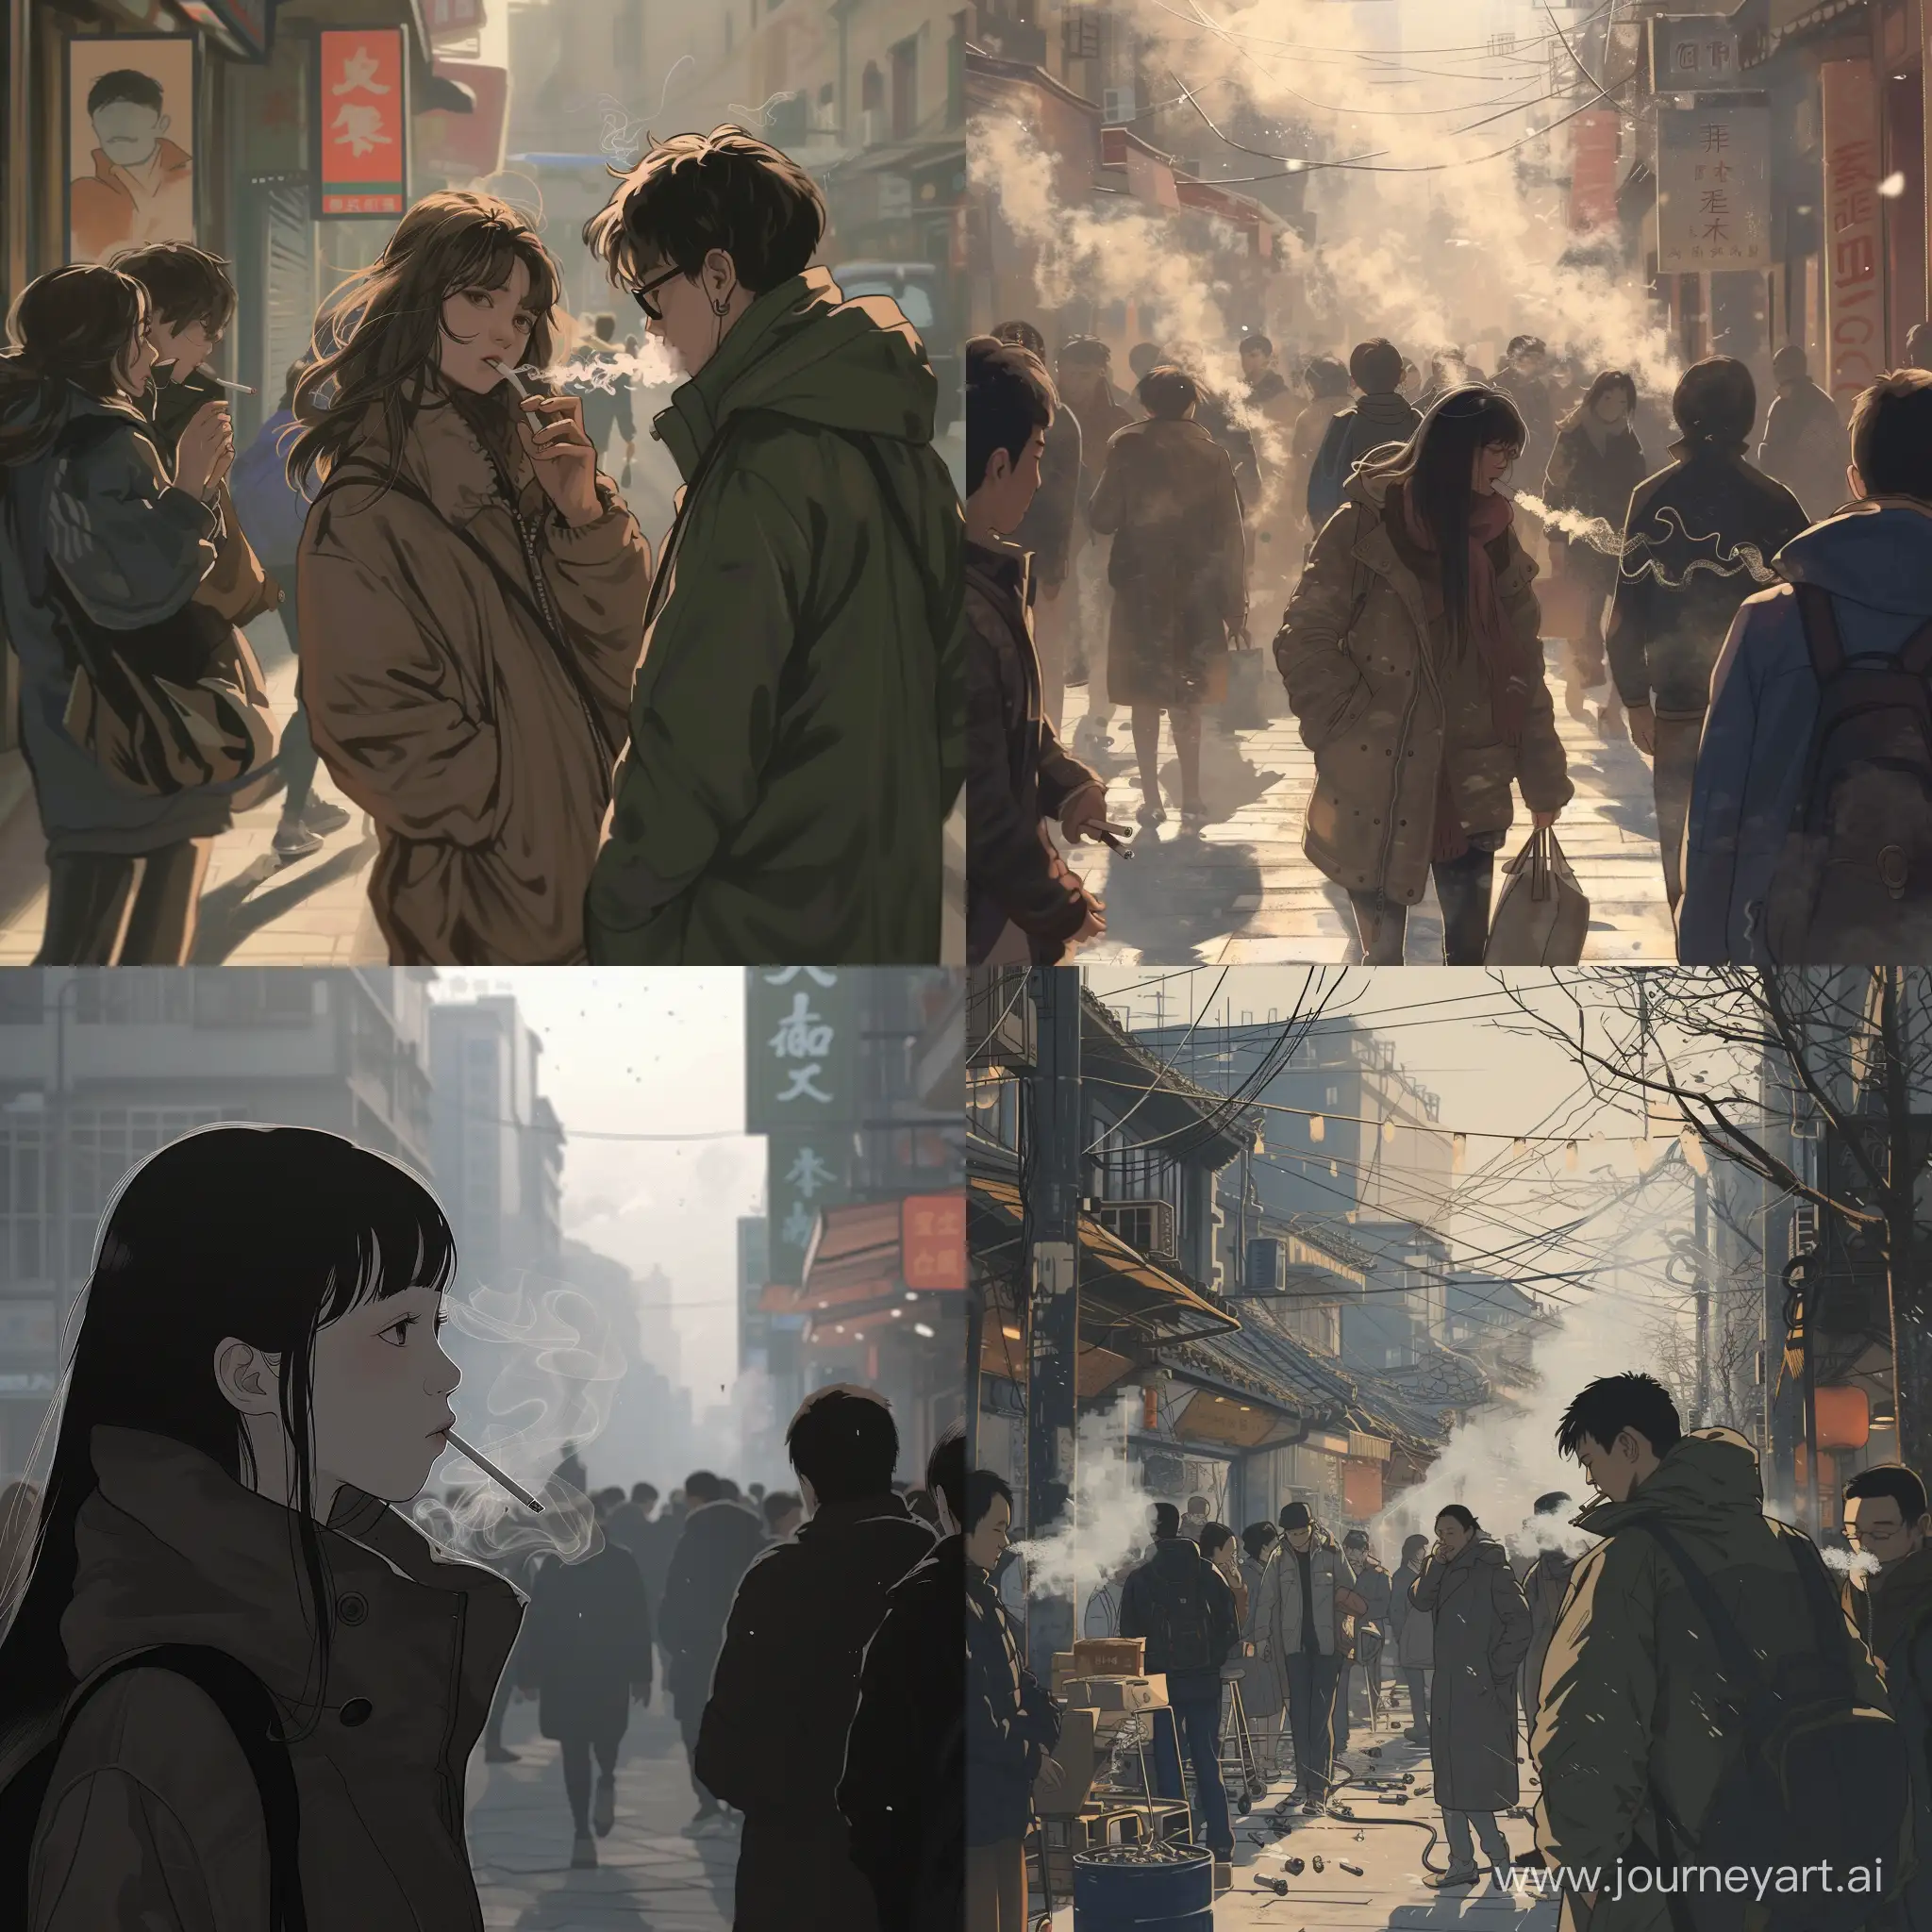 Urban-Tokyo-Vibes-Smoky-Scenes-in-Anime-Style